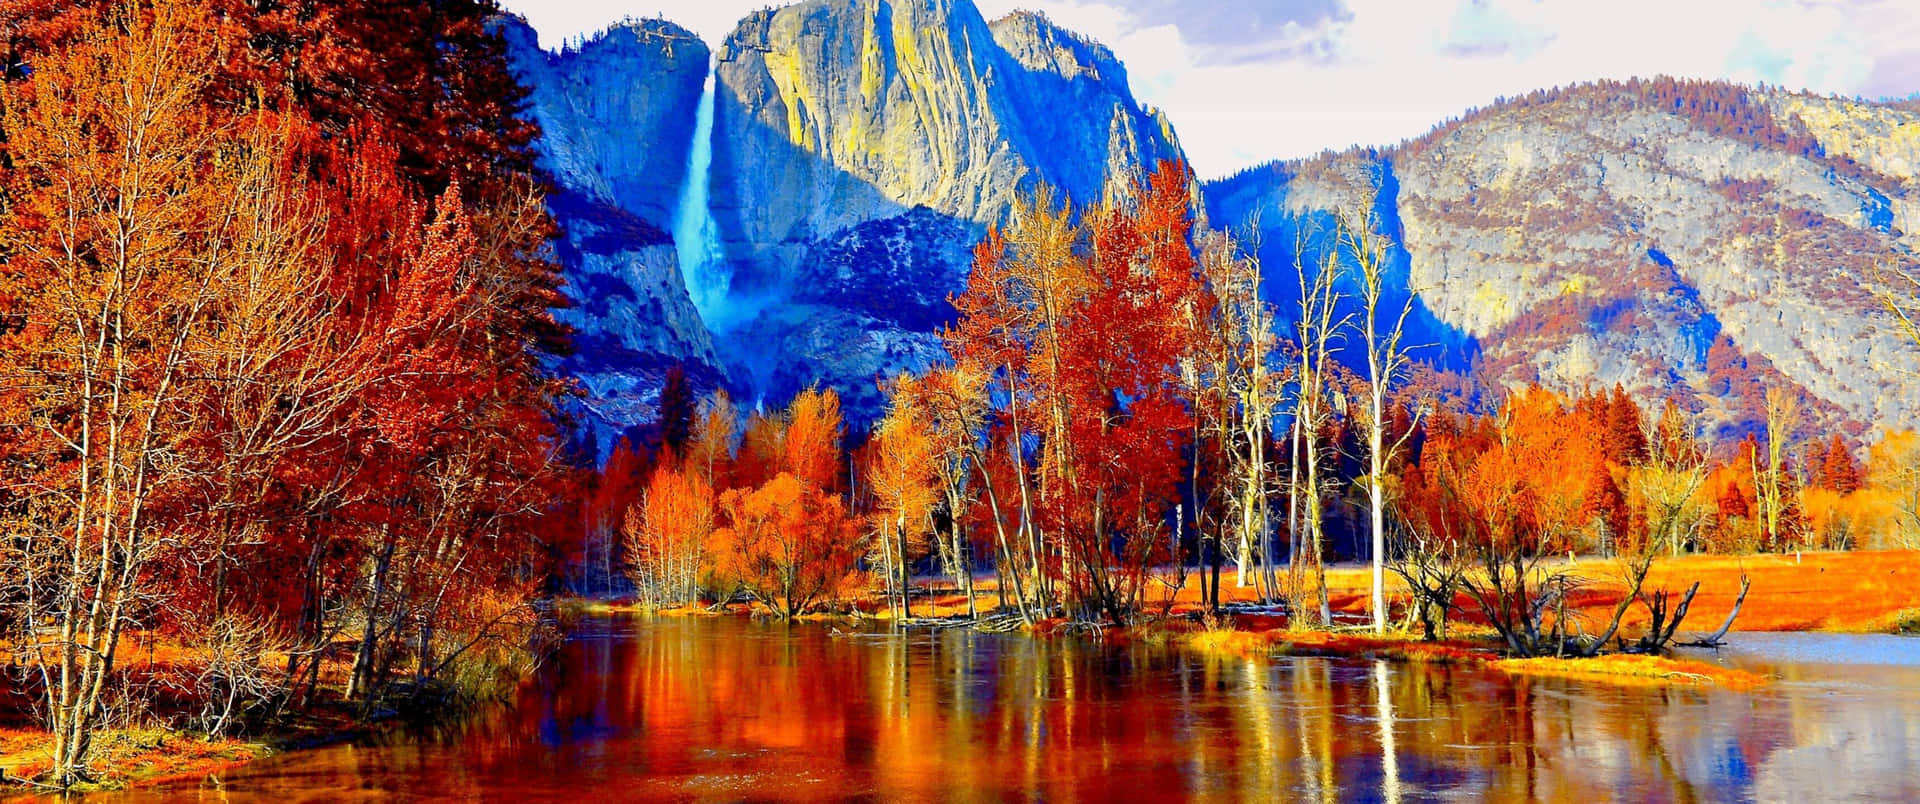 "A picturesque view of a fall landscape at 3440x1440." Wallpaper